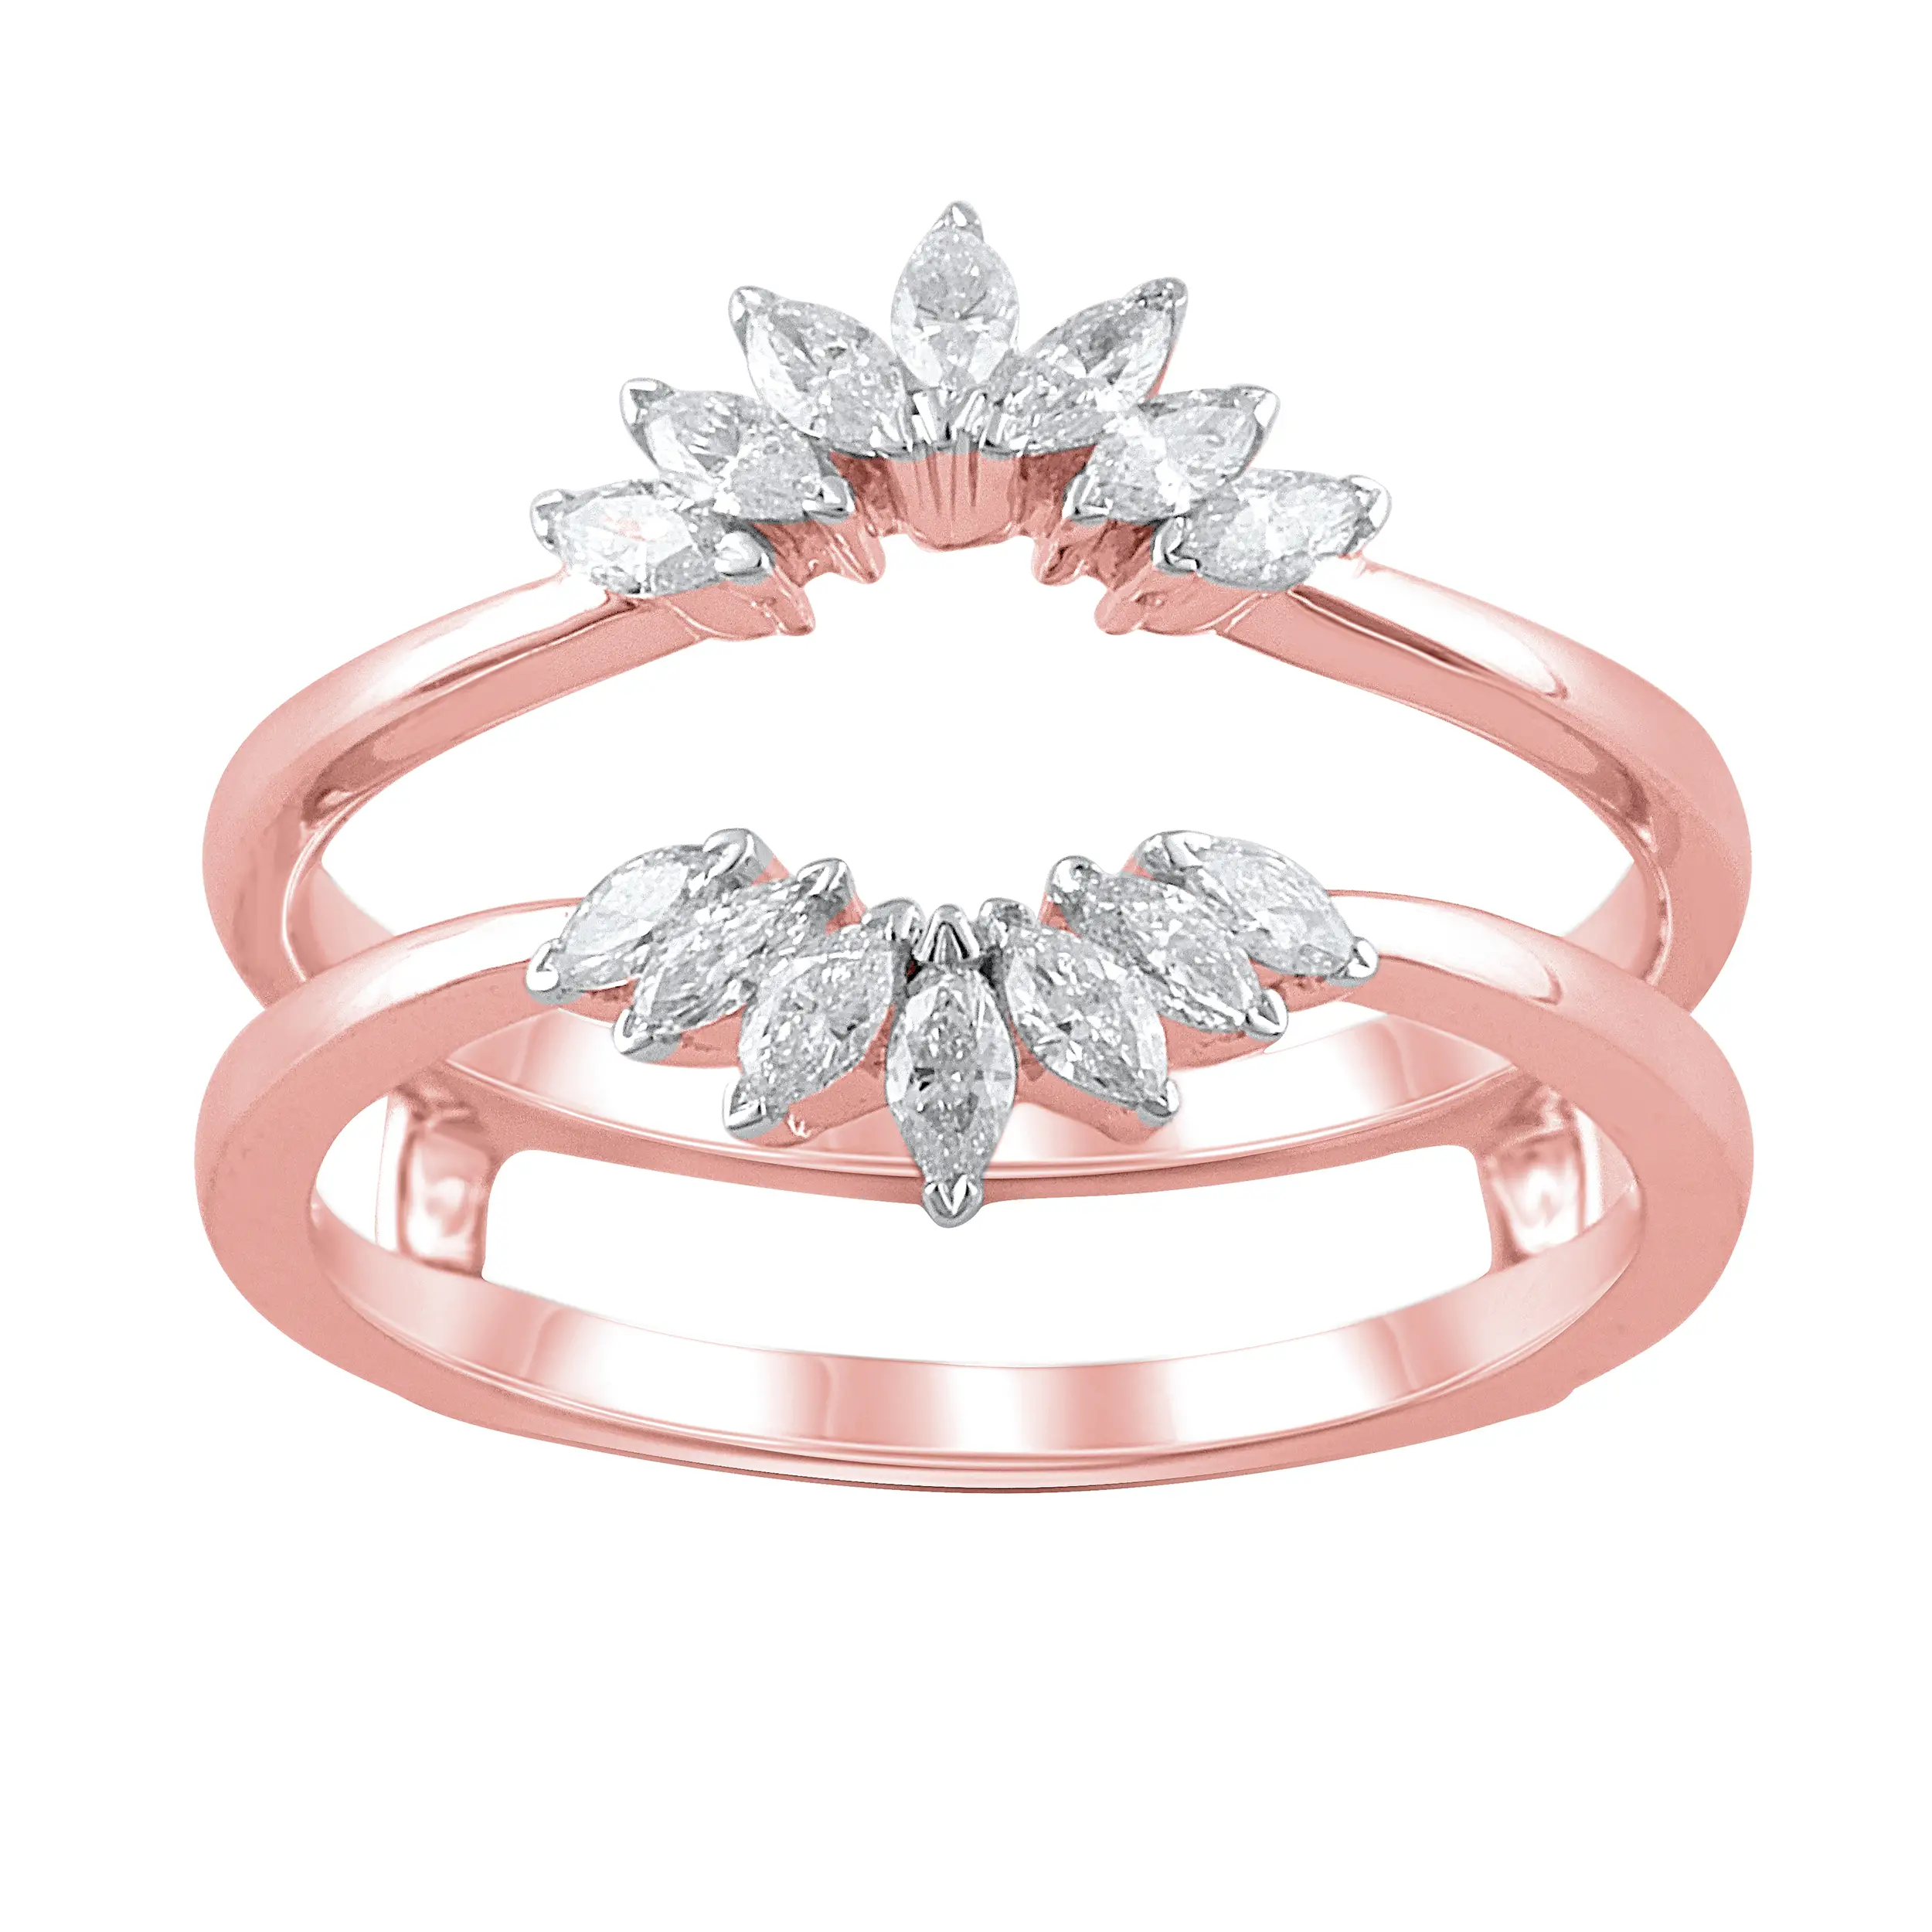 Enhancer Ring with 0.34 Carat TW of Diamonds in 10kt Rose Gold